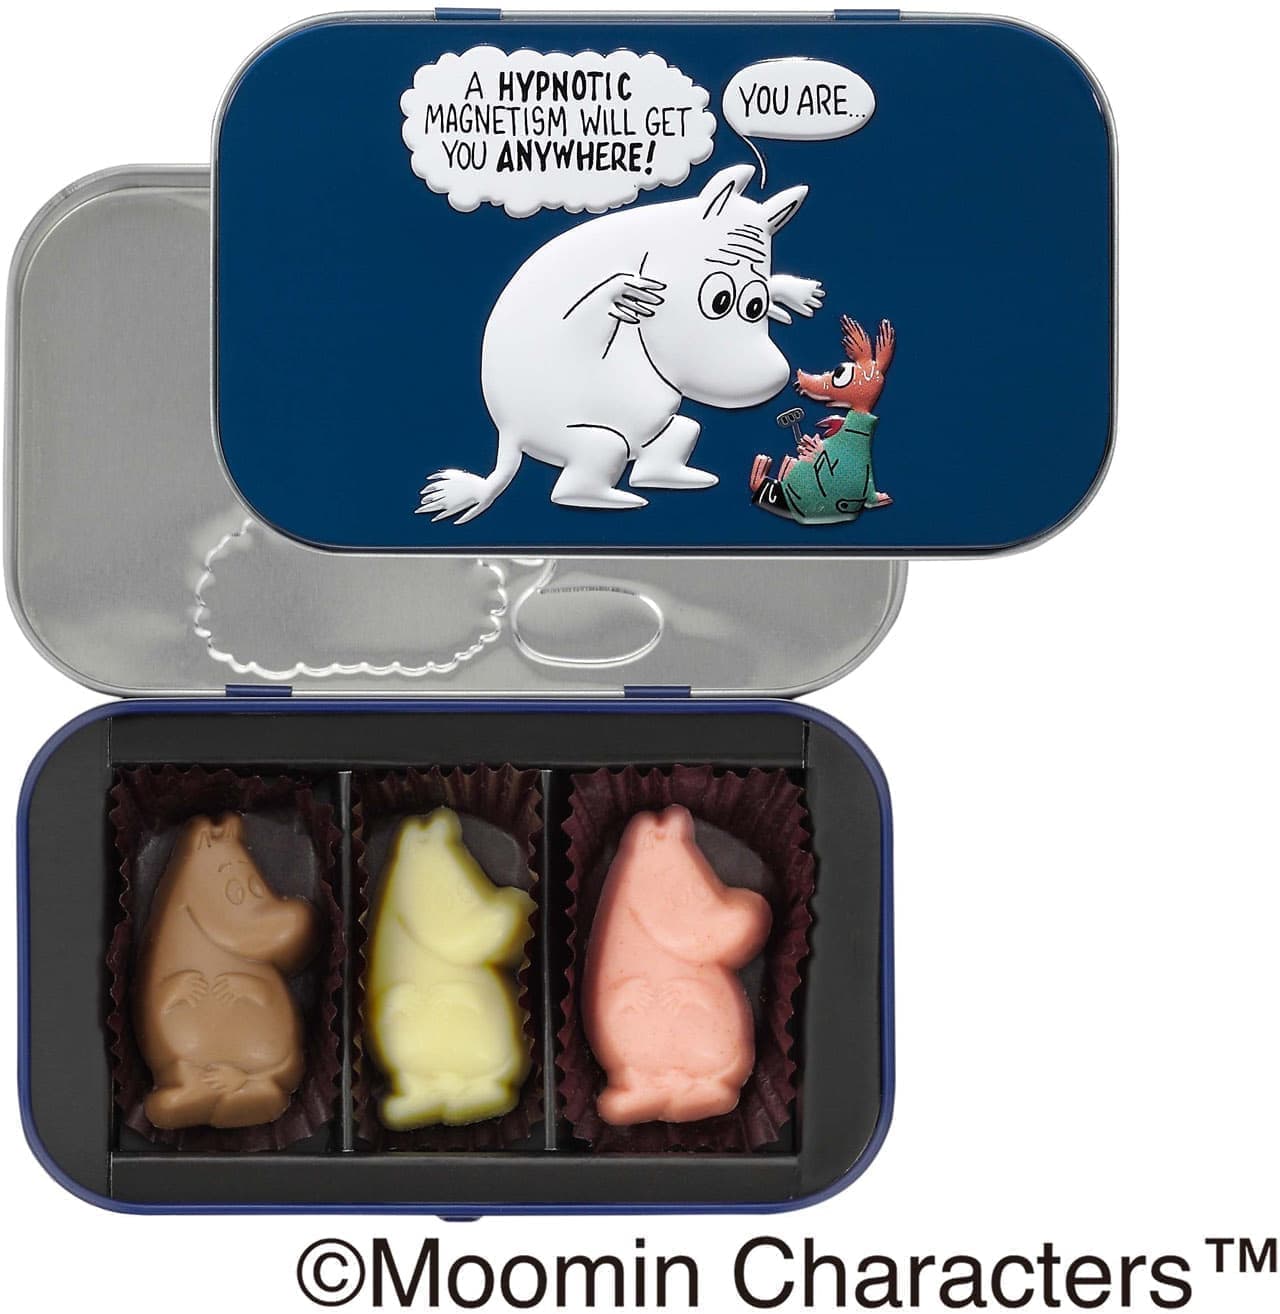 Mary Chocolate "Moomin x Mary Online Shop Limited Set"